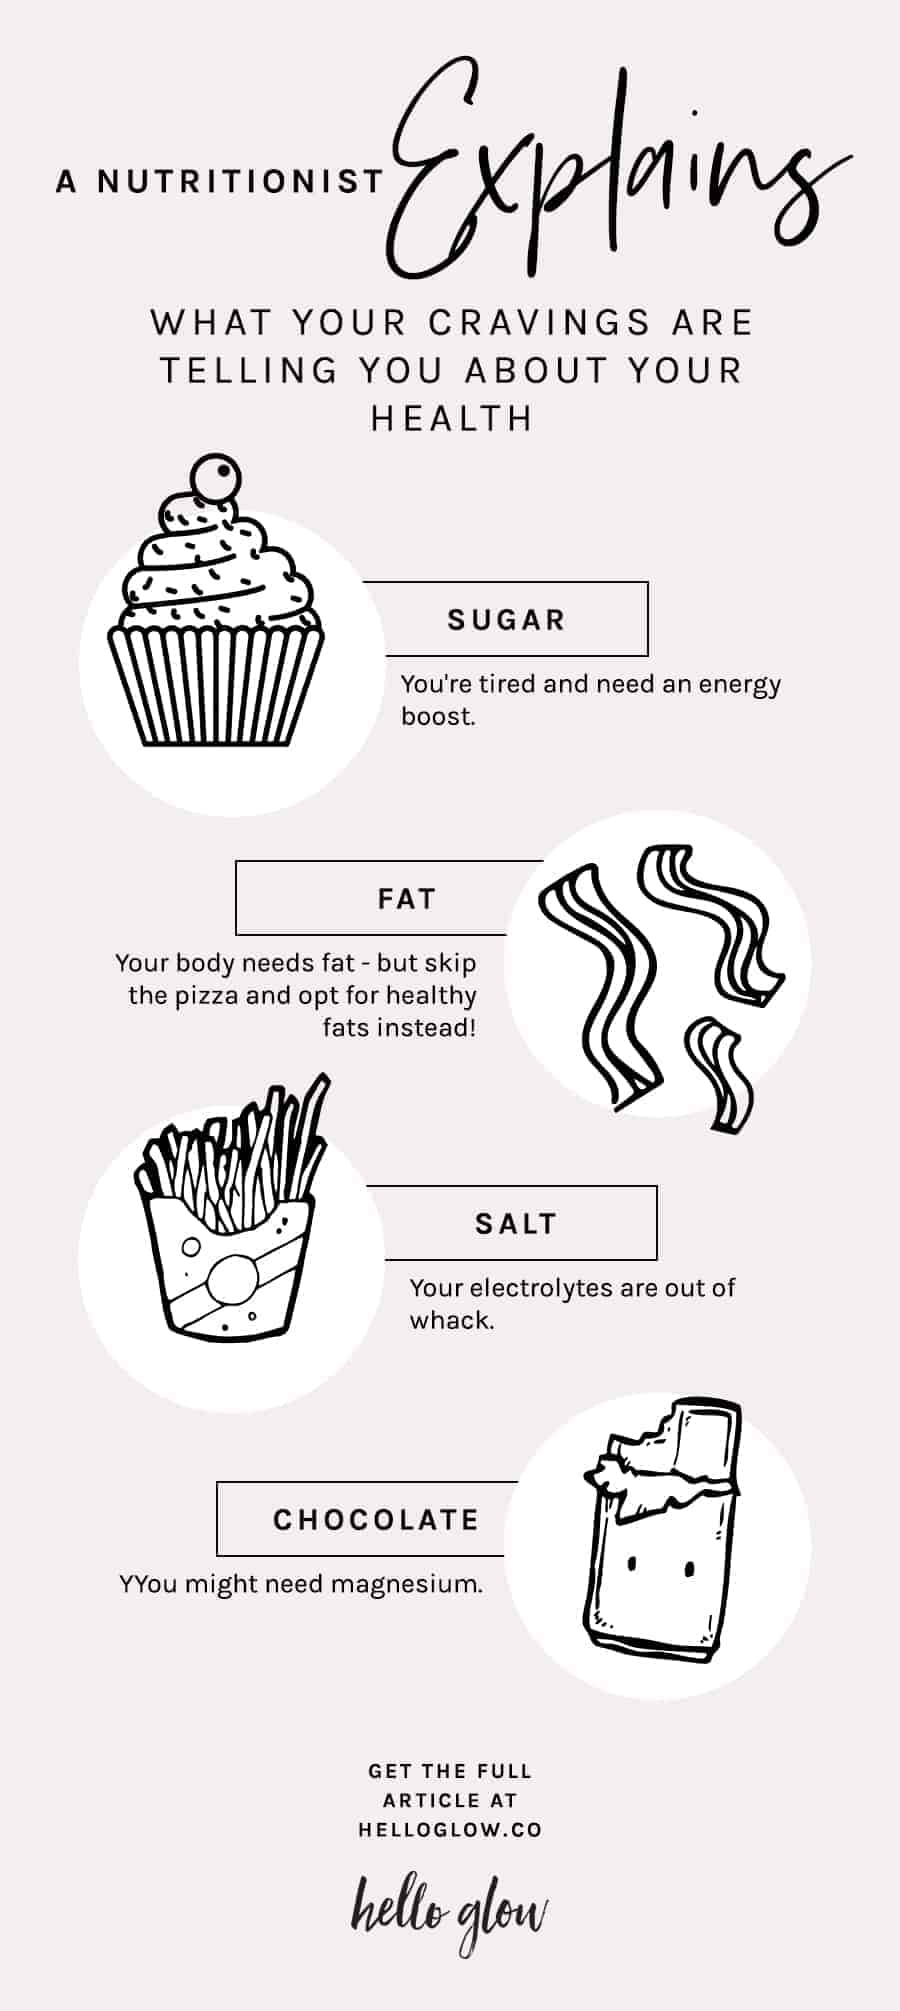 A Nutritionist Explains: What Your Cravings Mean